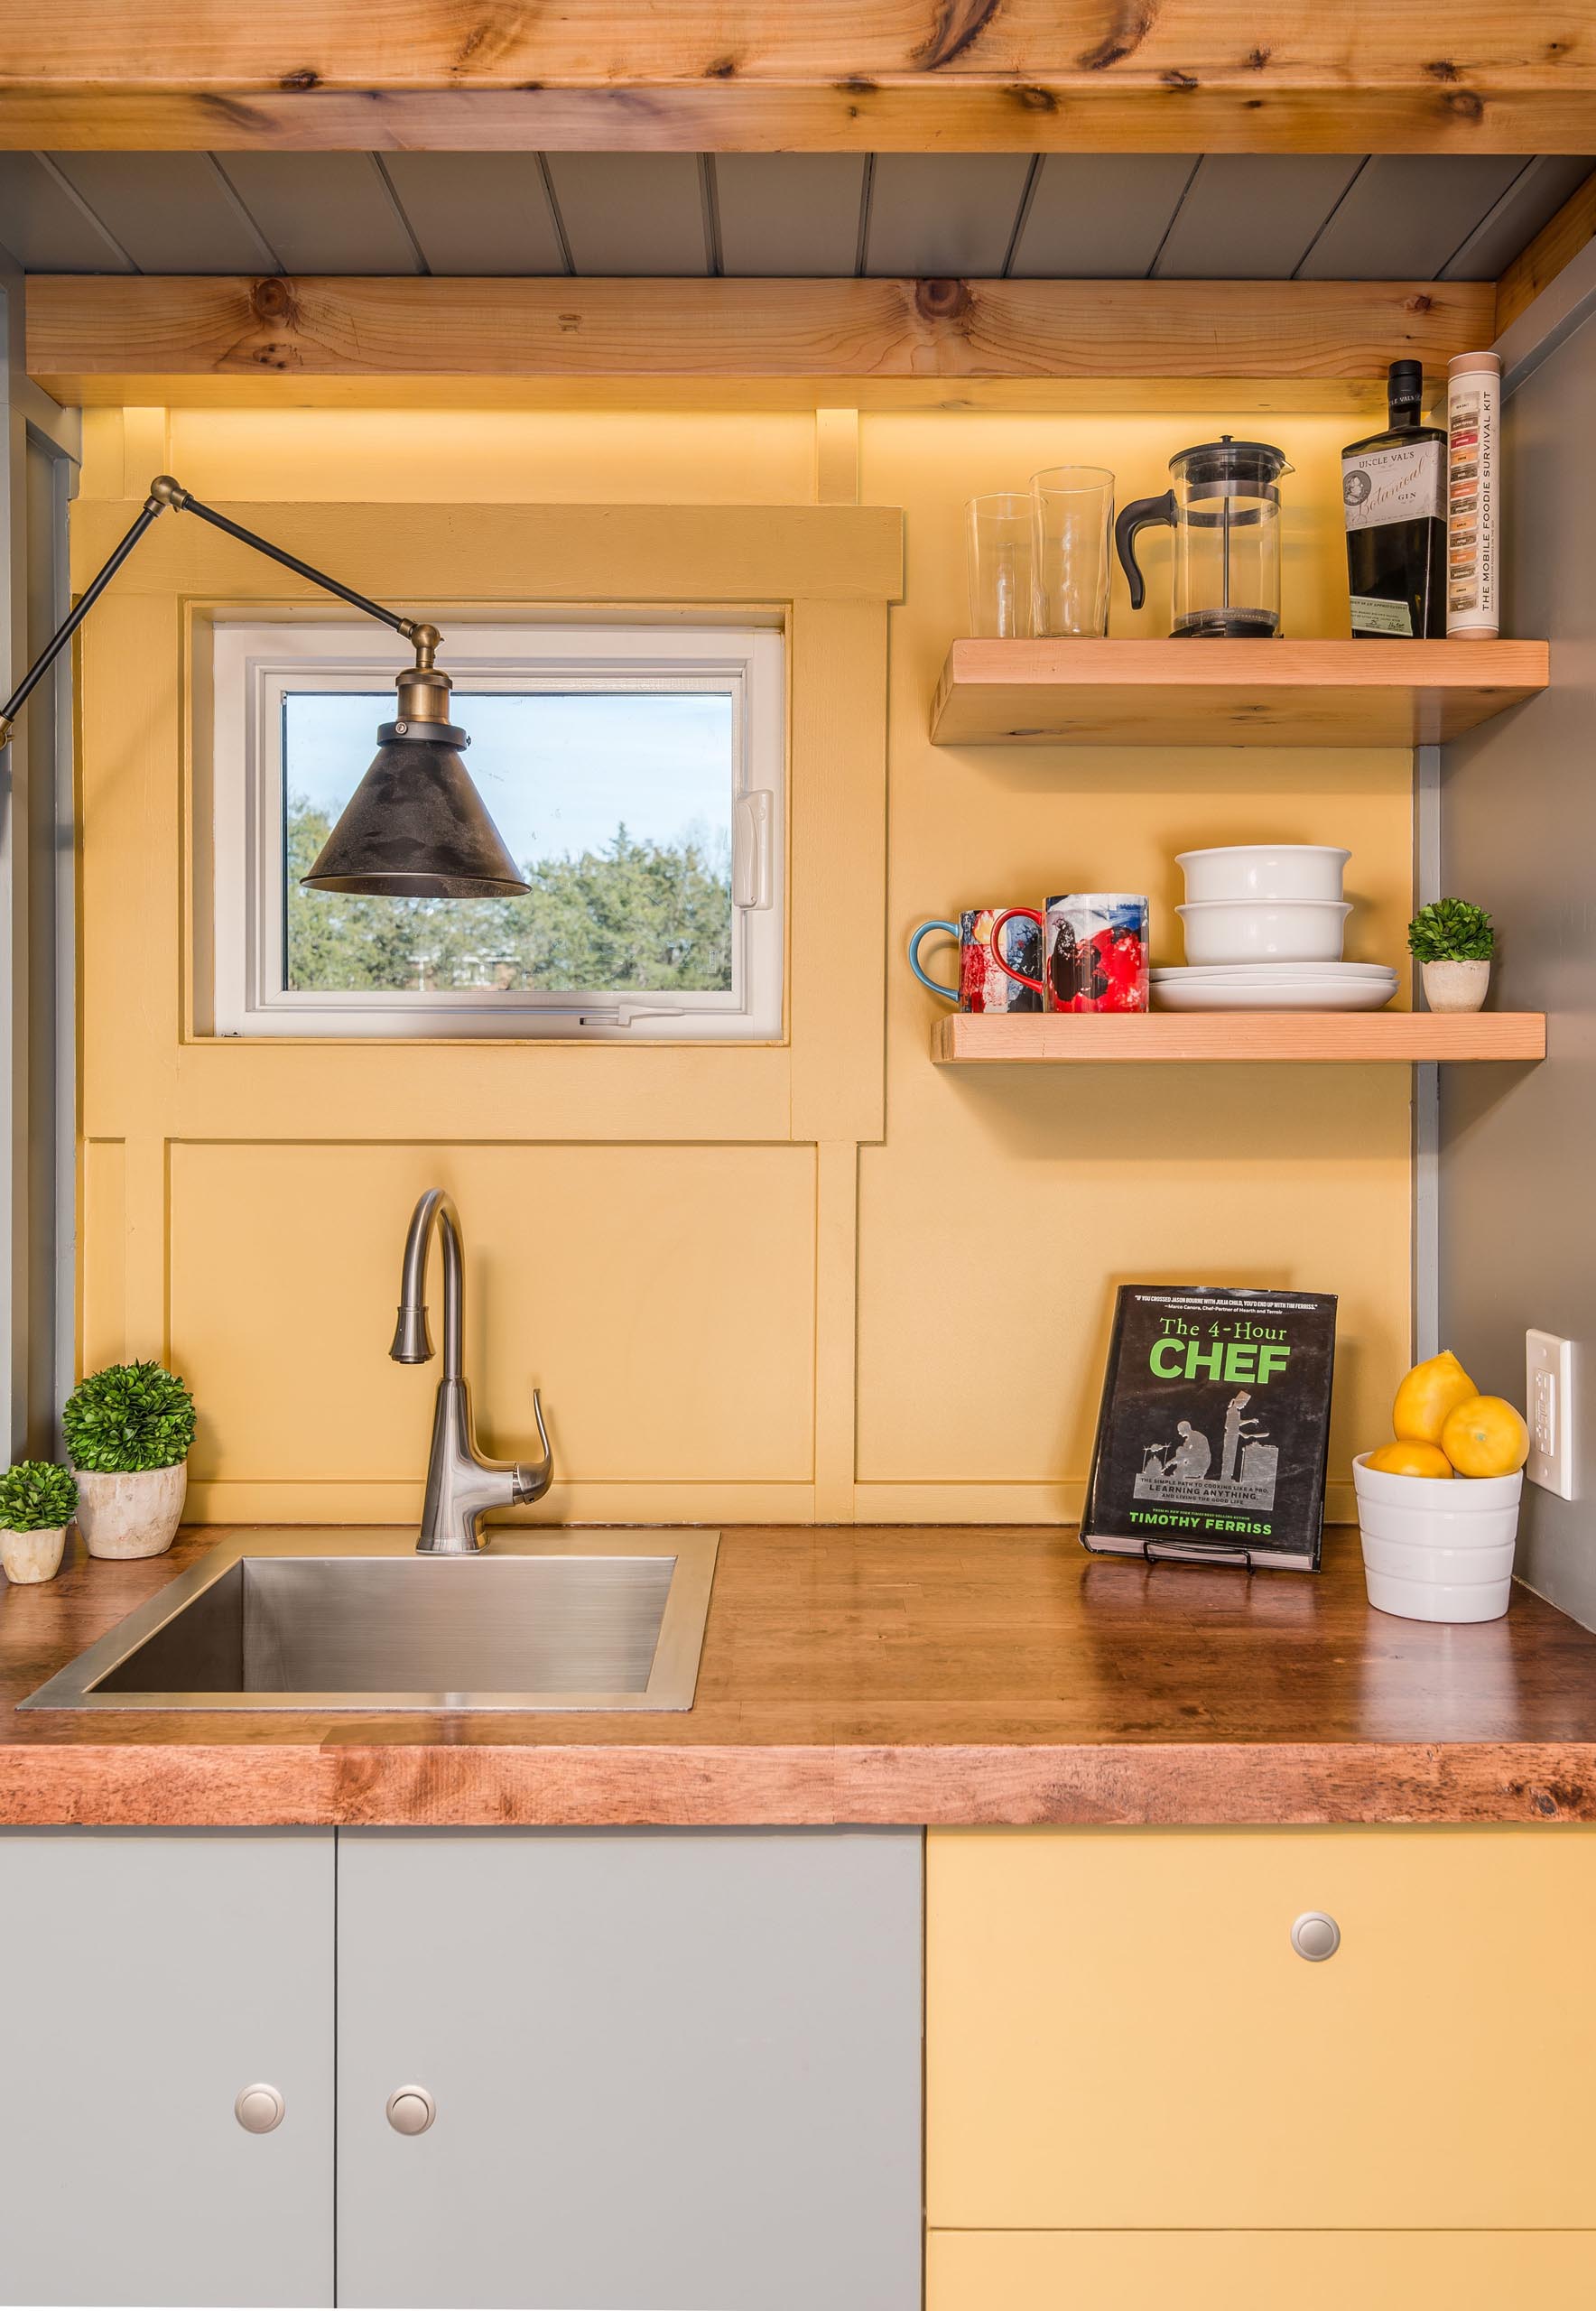 The soft yellow, gray, and wood kitchen of this tiny home includes a stainless steel faucet and matching sink, a dark wood countertop, and floating corner shelves.